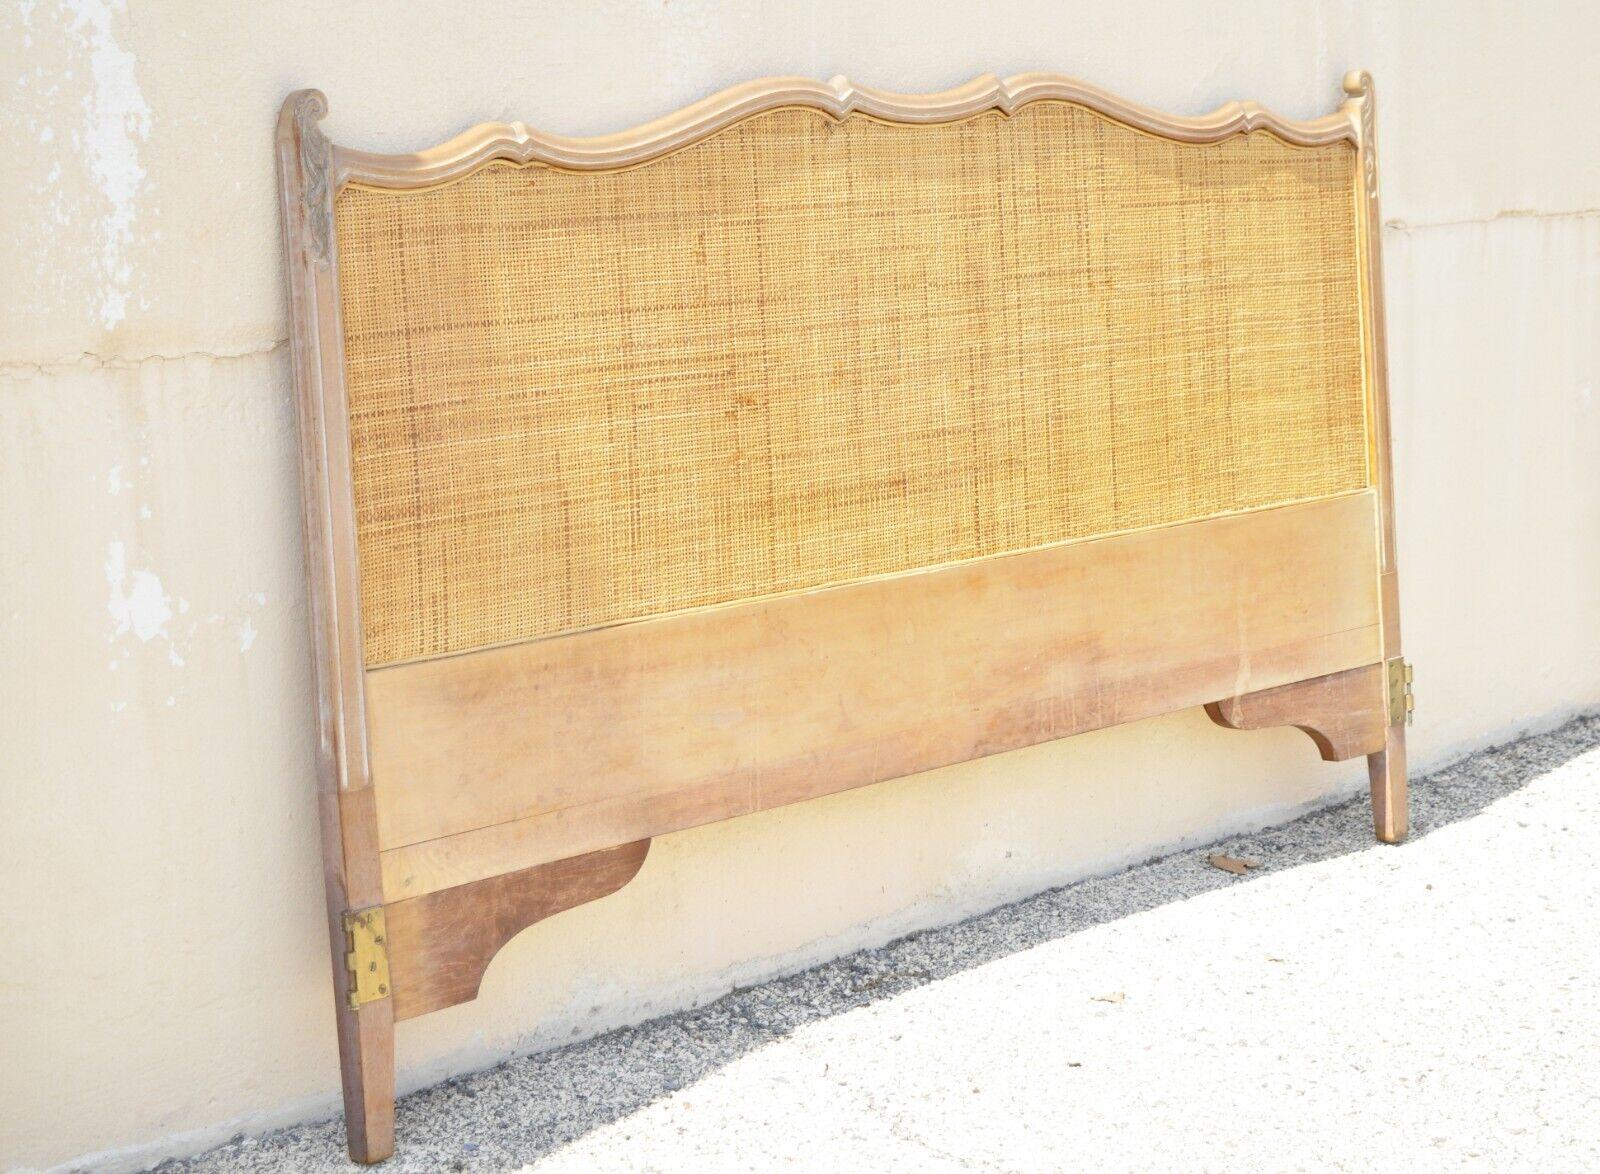 Vintage French provincial cane panel carved wood king size bed headboard. Item features a cane central panel, white washed finish, solid wood frame, beautiful wood grain, distressed finish, very nice vintage item, quality American craftsmanship.